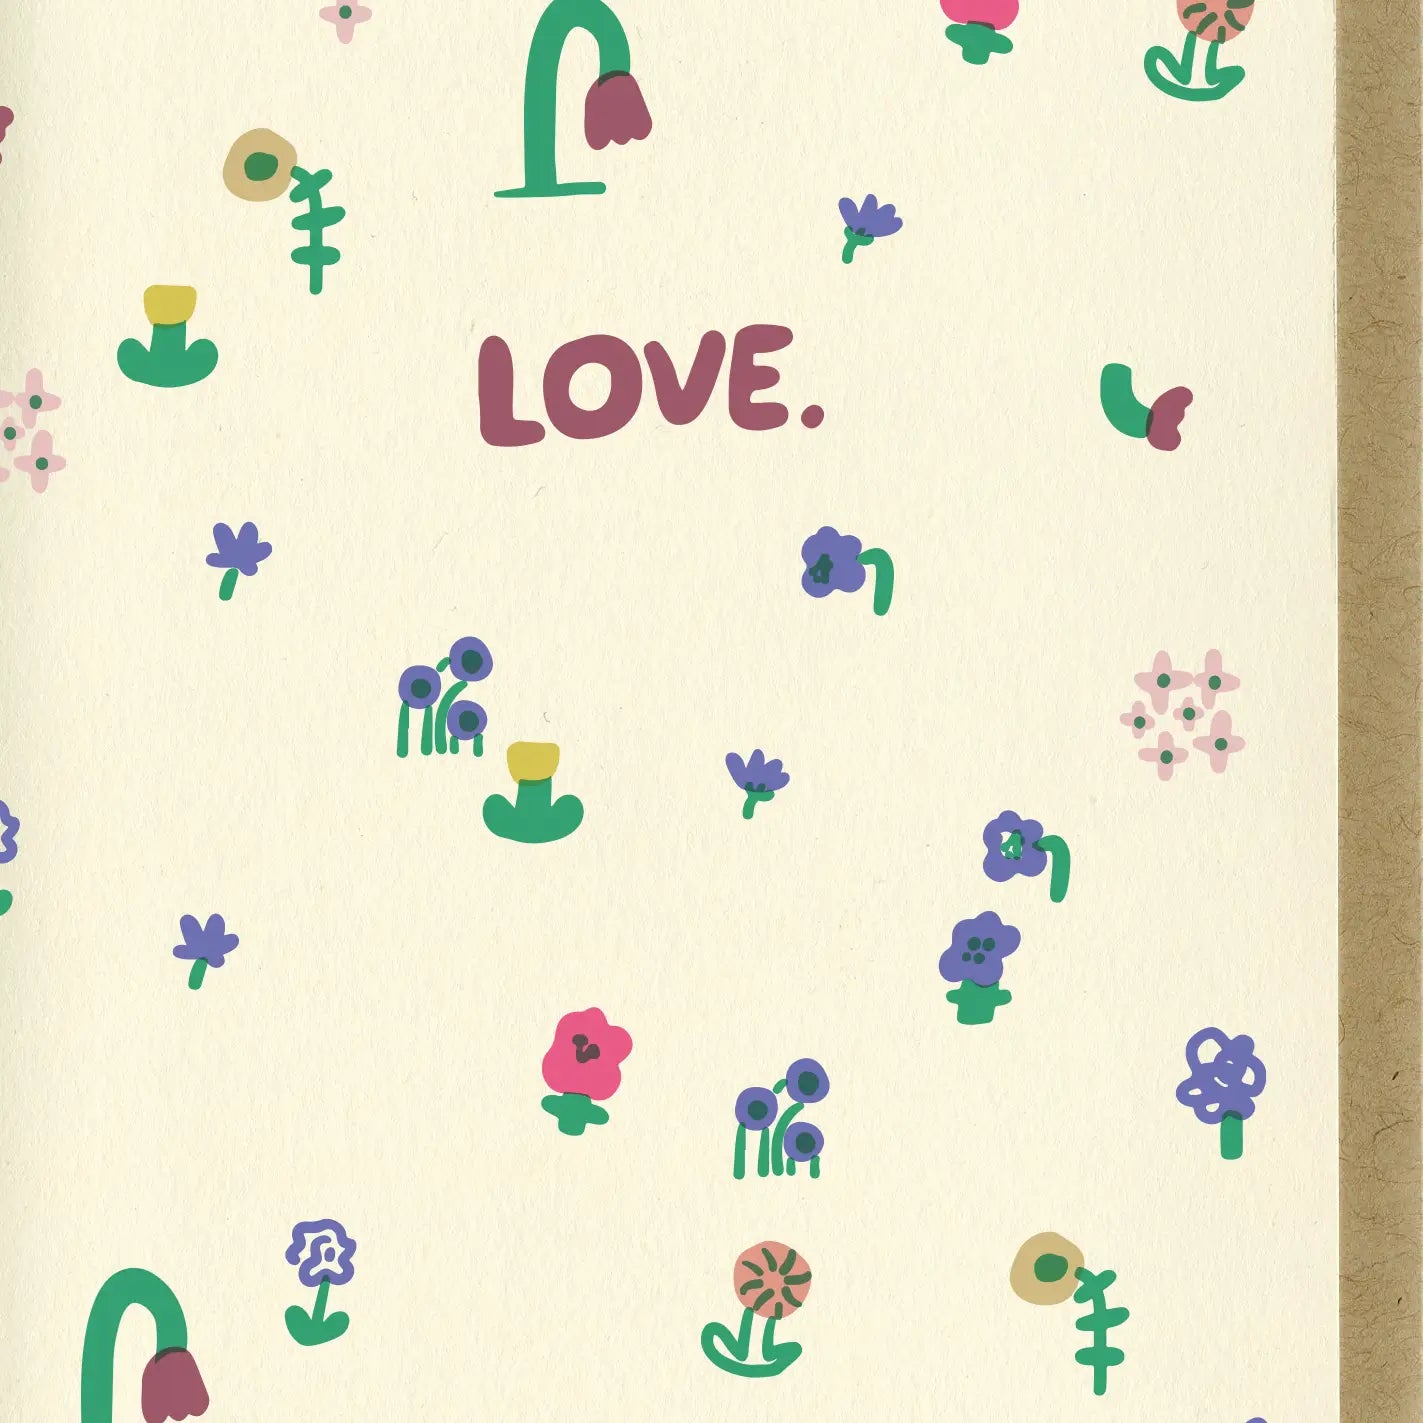 People I've Loved Cards | Love Card | Prelude & Dawn | Los Angeles